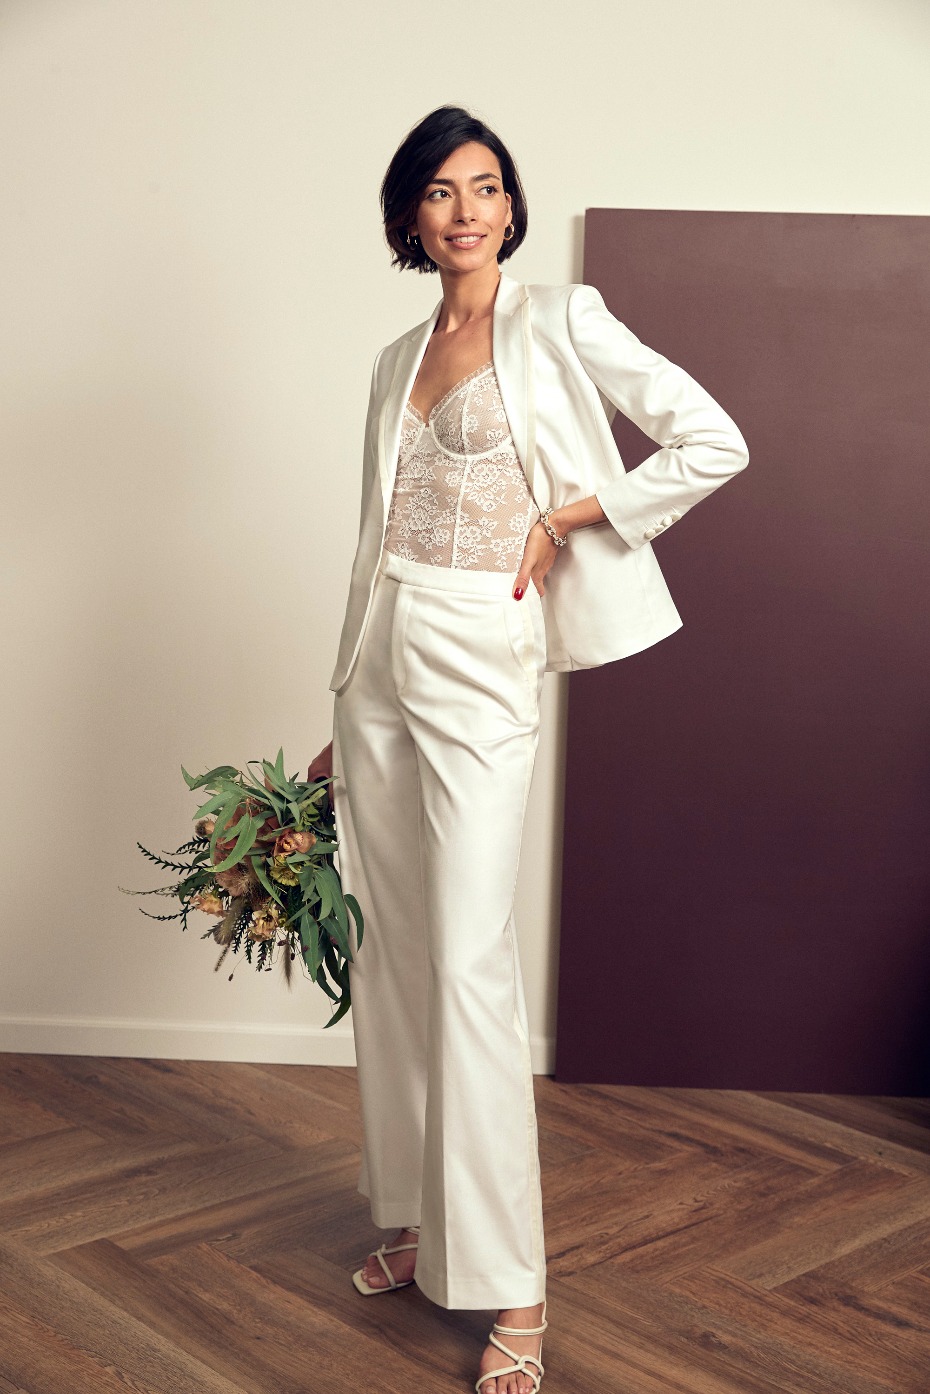 Yes, You Can Rewear Your Wedding Gown and Make It Look Good